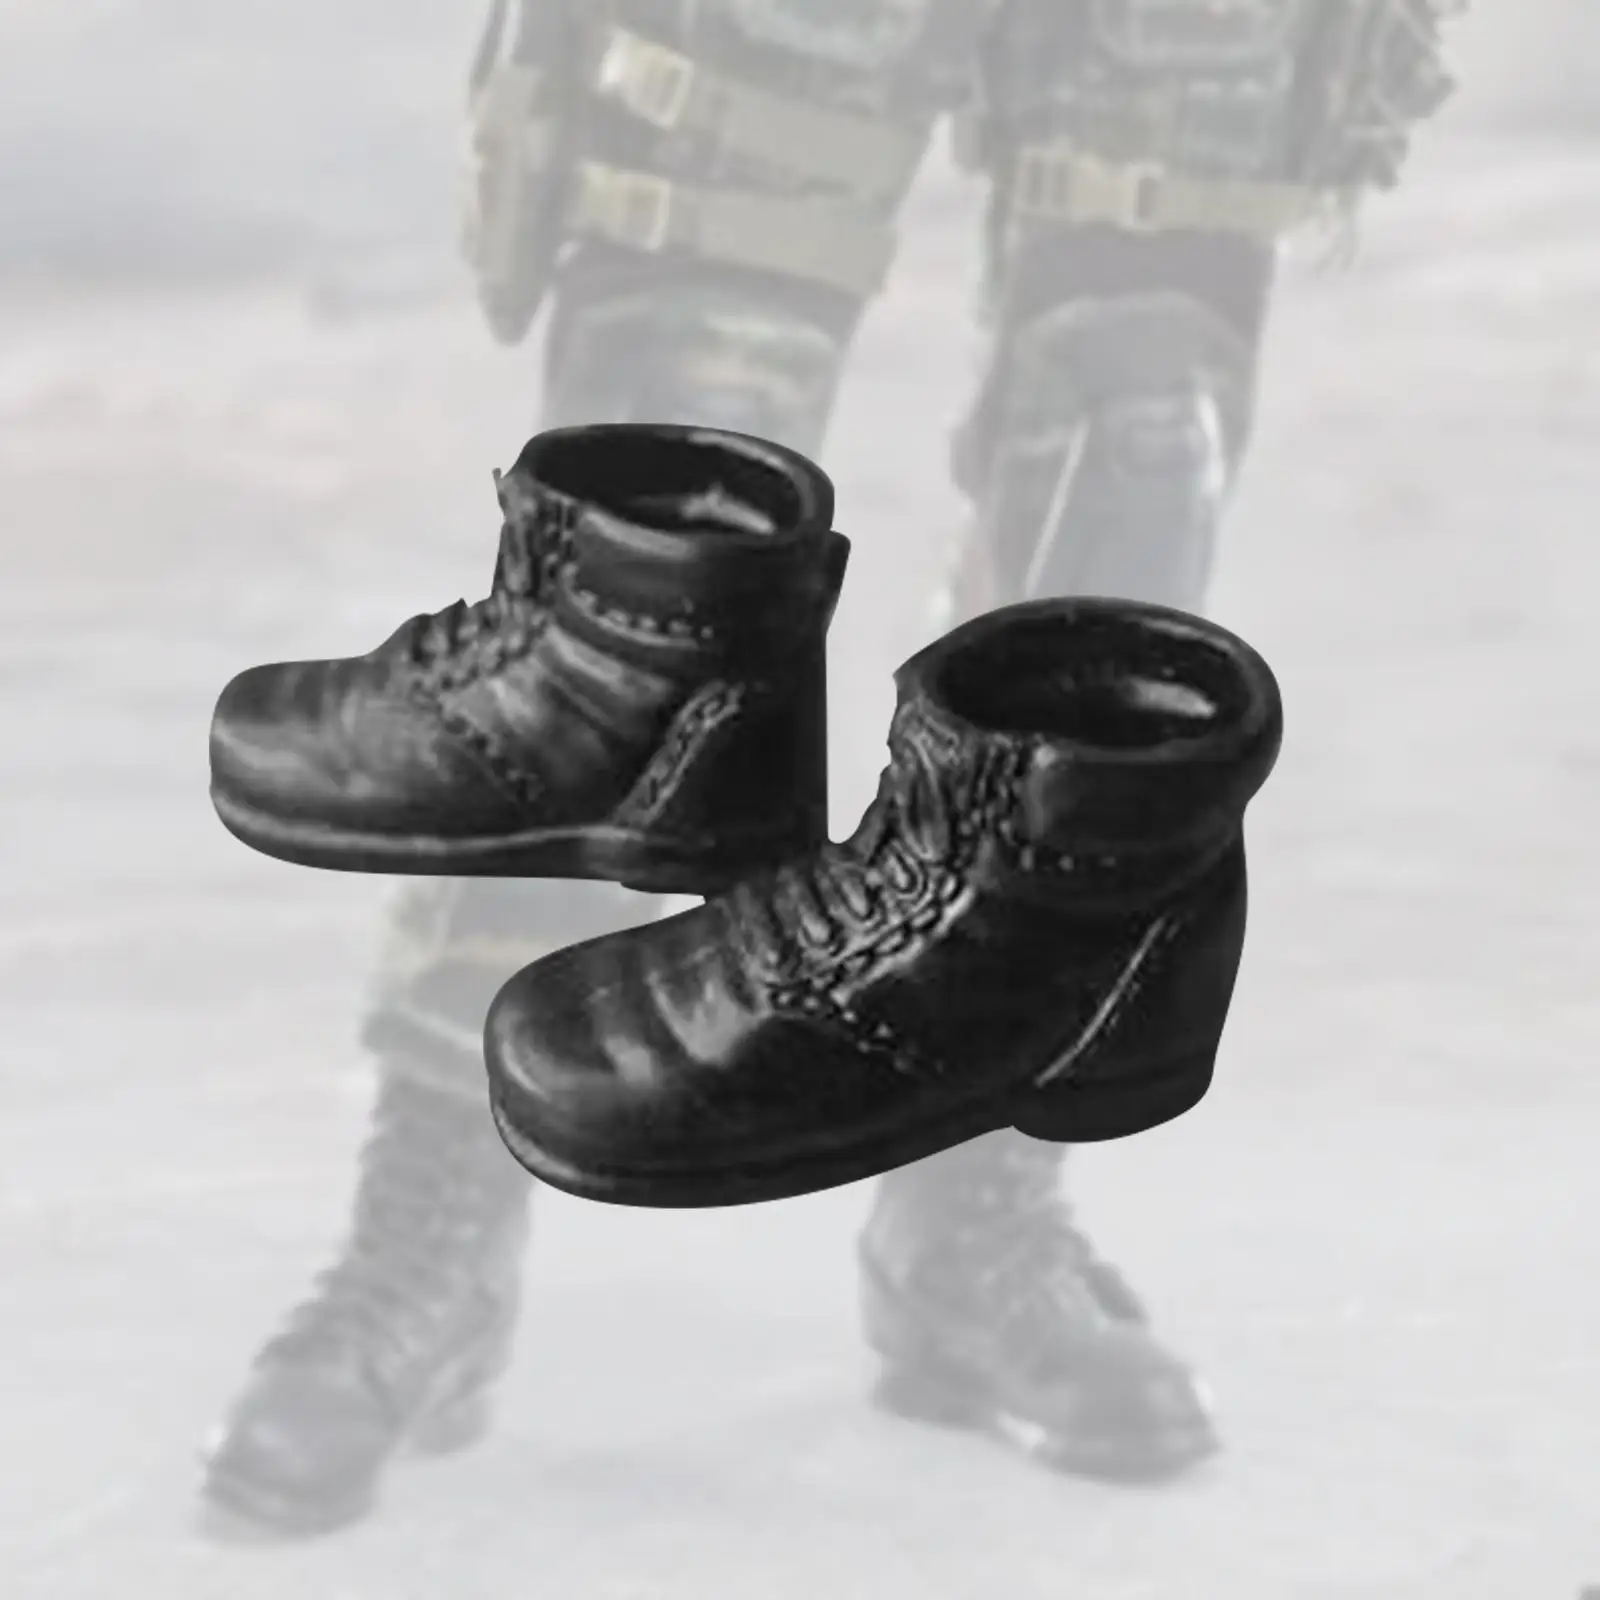 1/6 Scale Figure Booties Shoes Miniature Soldier Costume Casual Female Figure Boots Costume for 12`` inch Soldier Figures